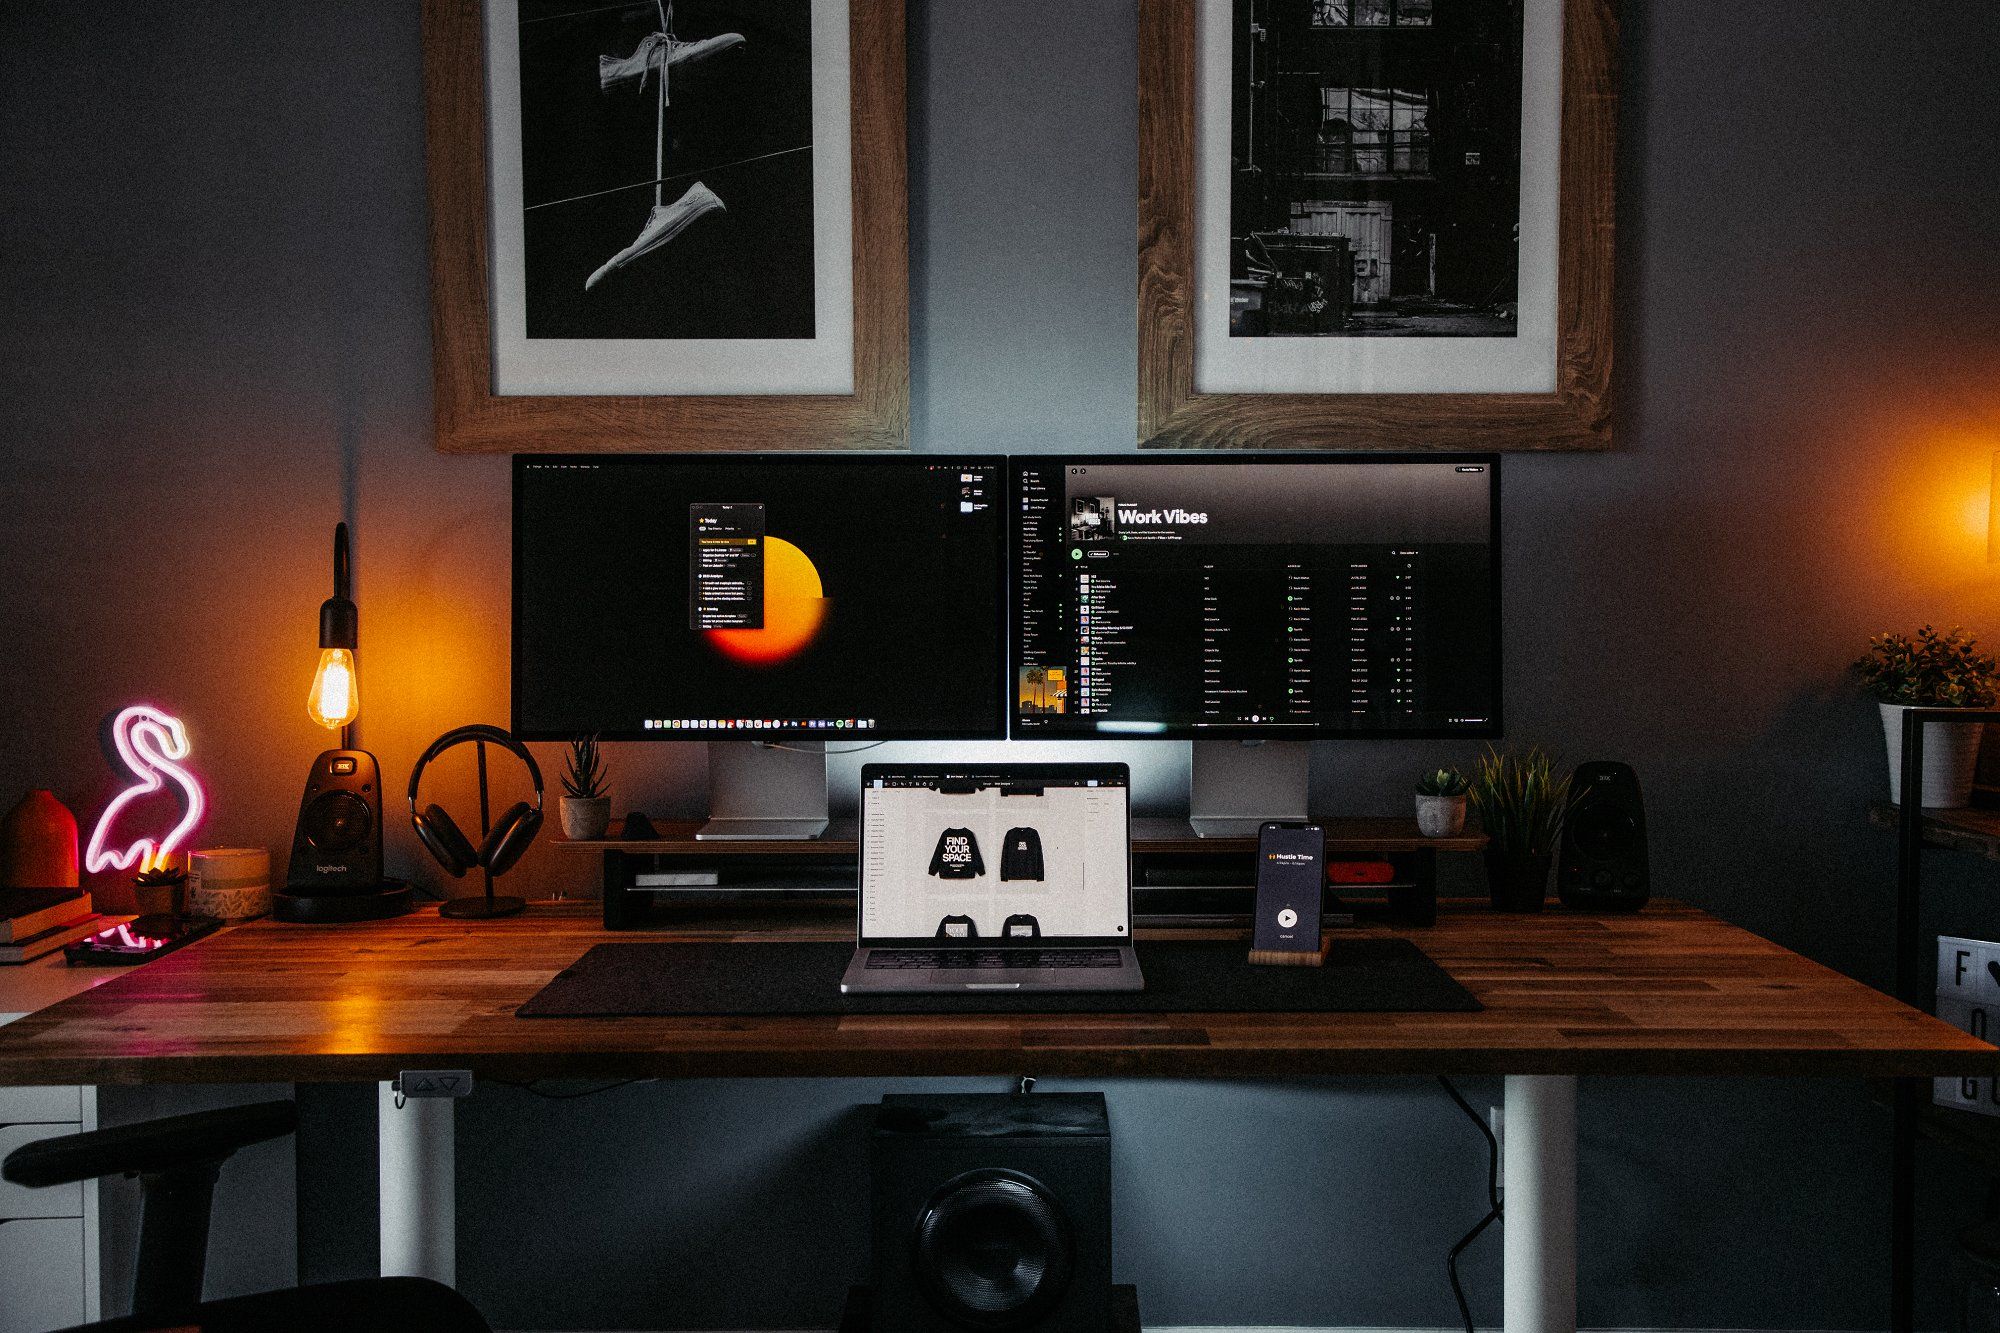 A home office setup with a MacBook, an iPhone, and two Apple Studio Displays on the desk, and two framed photo posters hanging on the wall above it